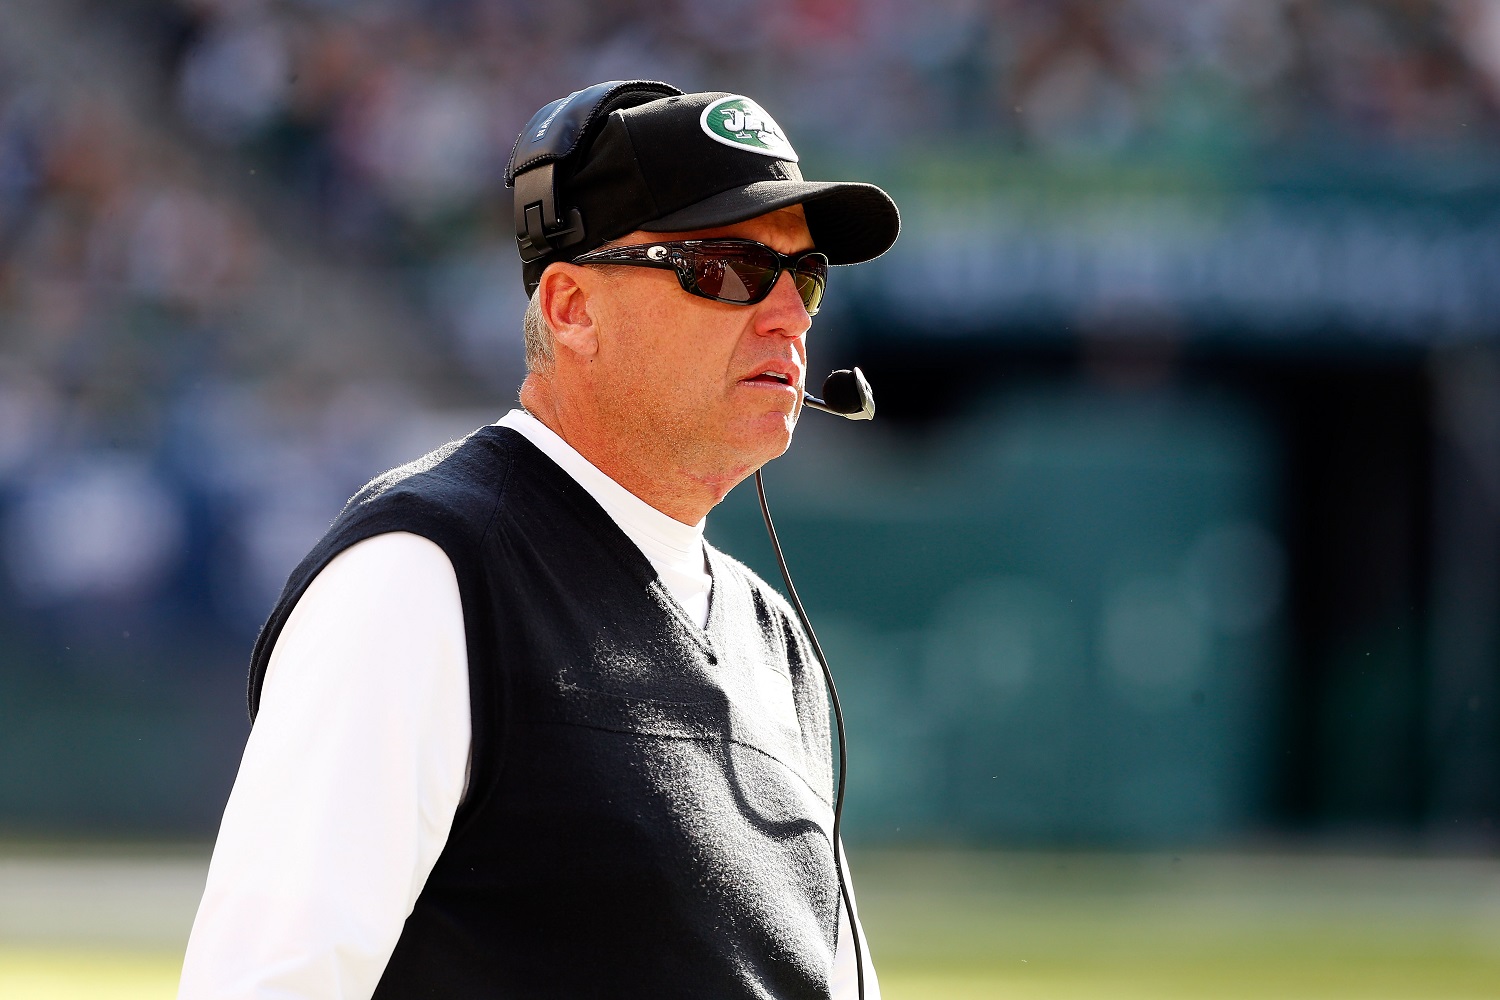 Coach Rex Ryan of the New York Jets looks on during a game against the New England Patriots on Oct. 20, 2013 at MetLife Stadium in East Rutherford, New Jersey.